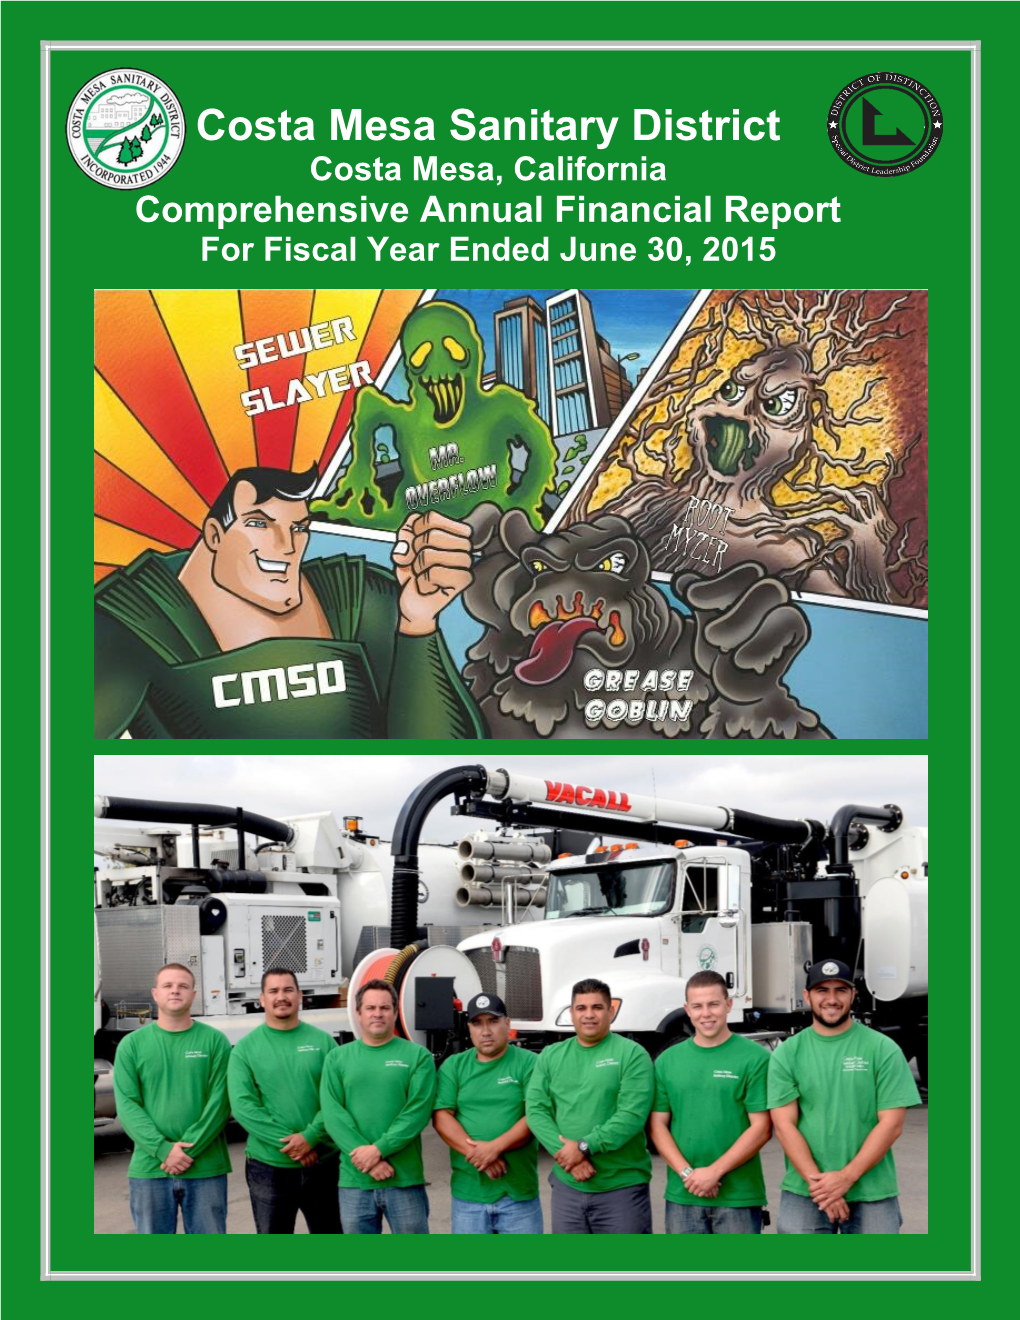 Comprehensive Annual Financial Report for Fiscal Year Ended June 30, 2015